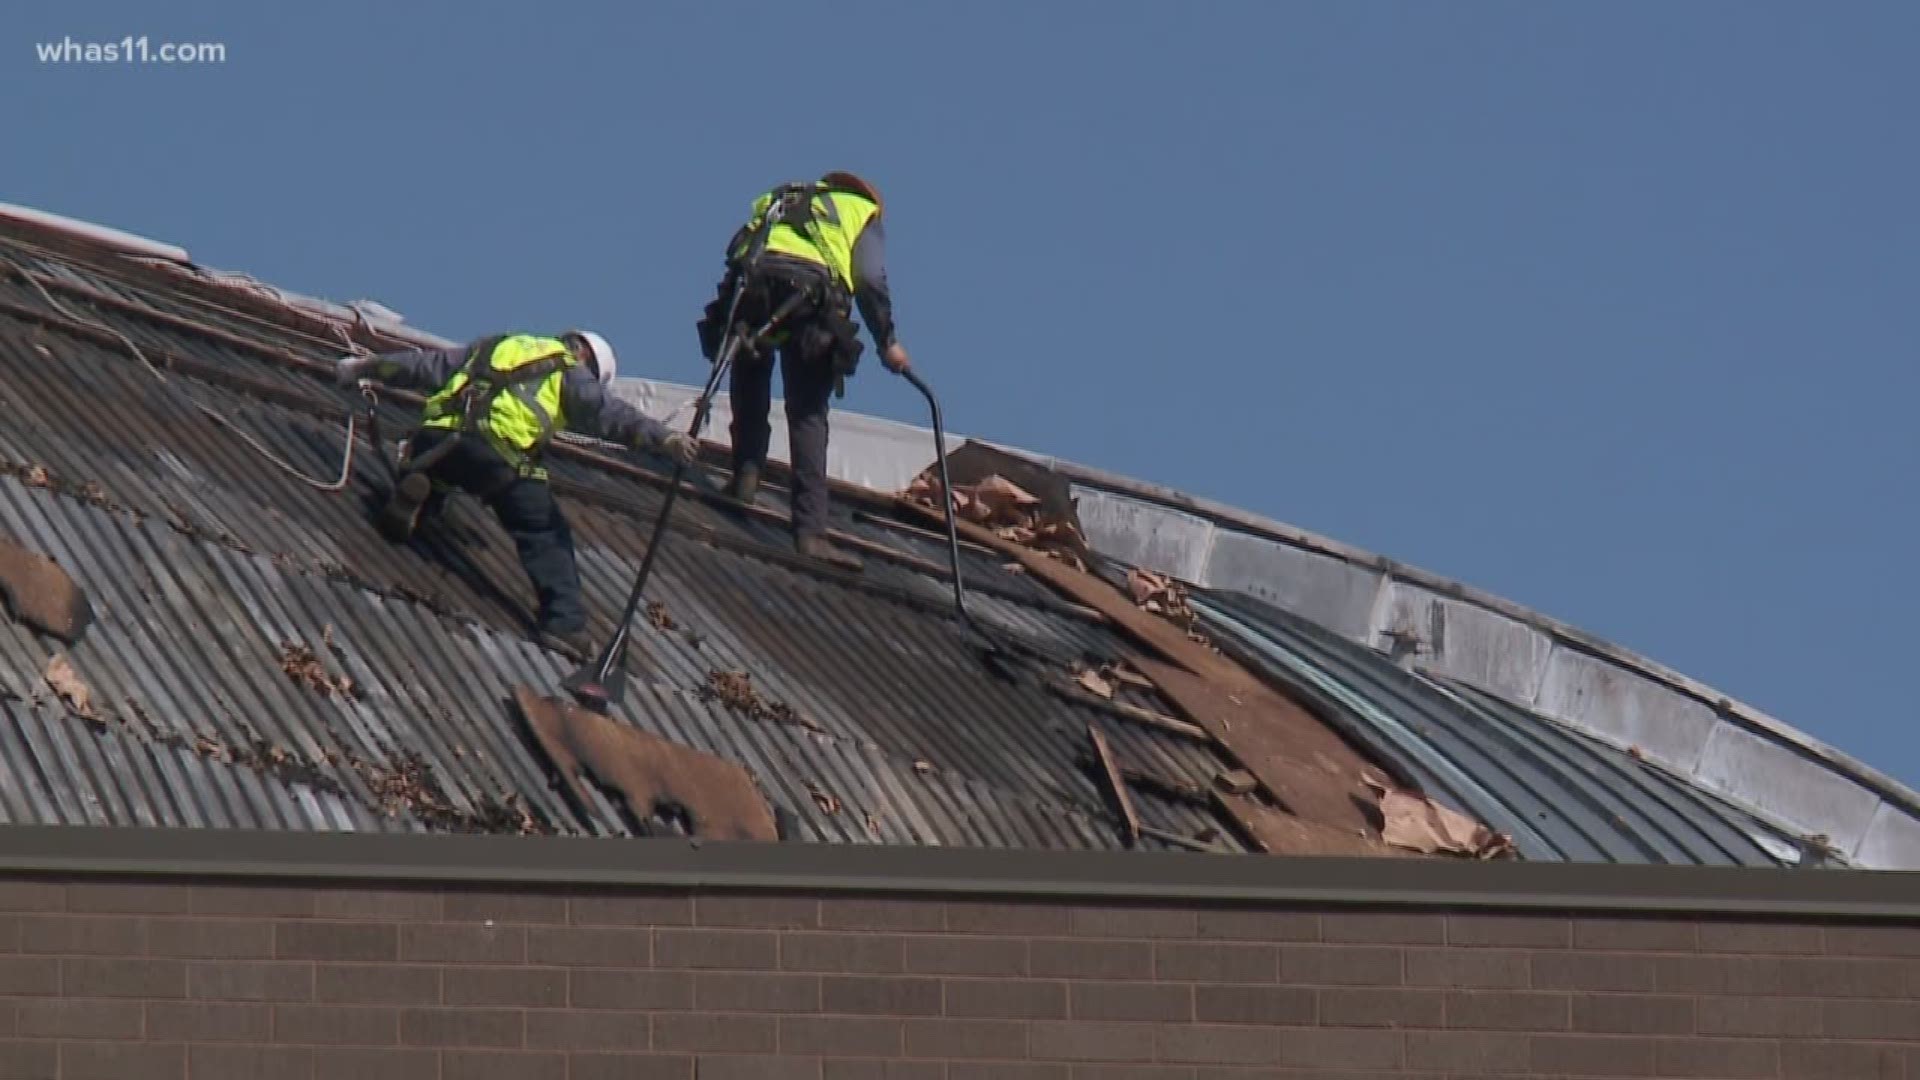 Kentucky Center continues to clean up after fire